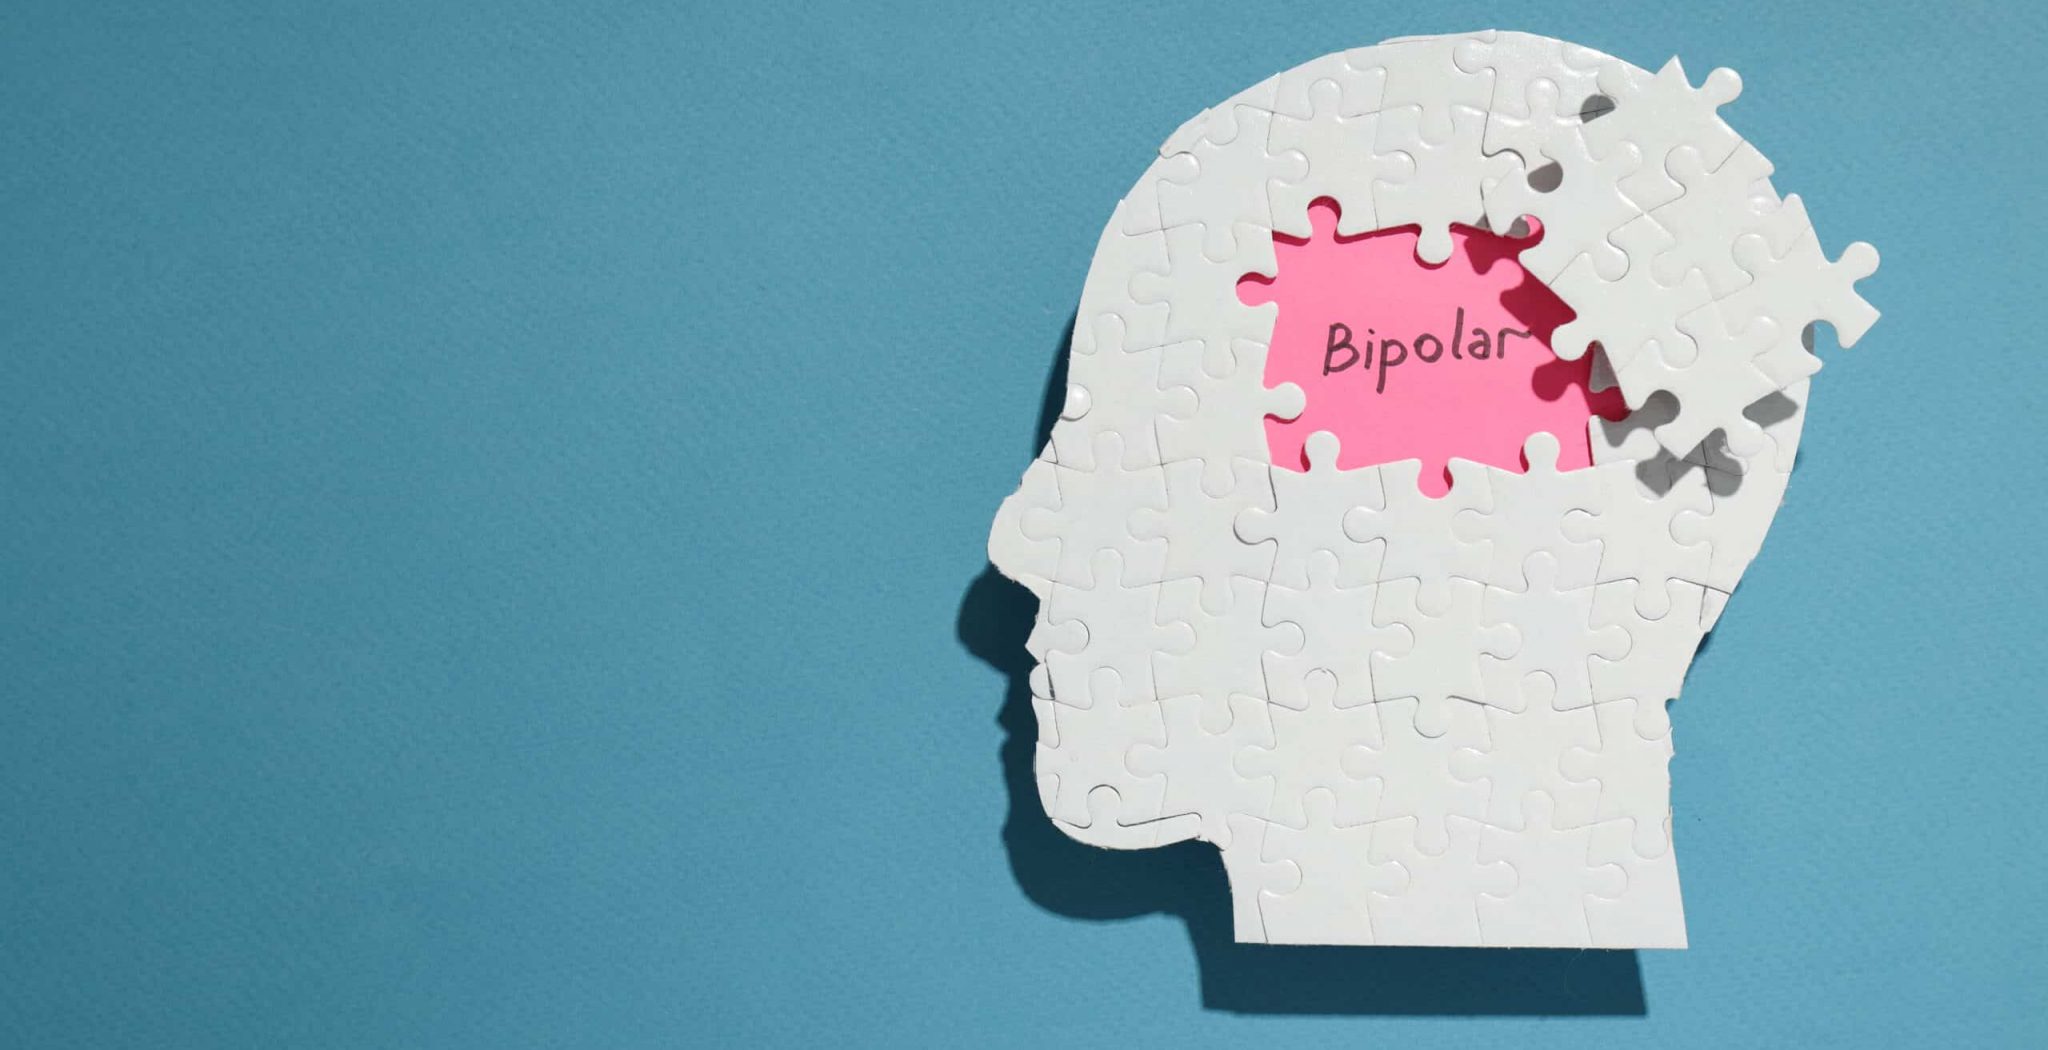 how a person with bipolar thinks, bipolar disorder, bipolar treatment, bipolar disorder treatment